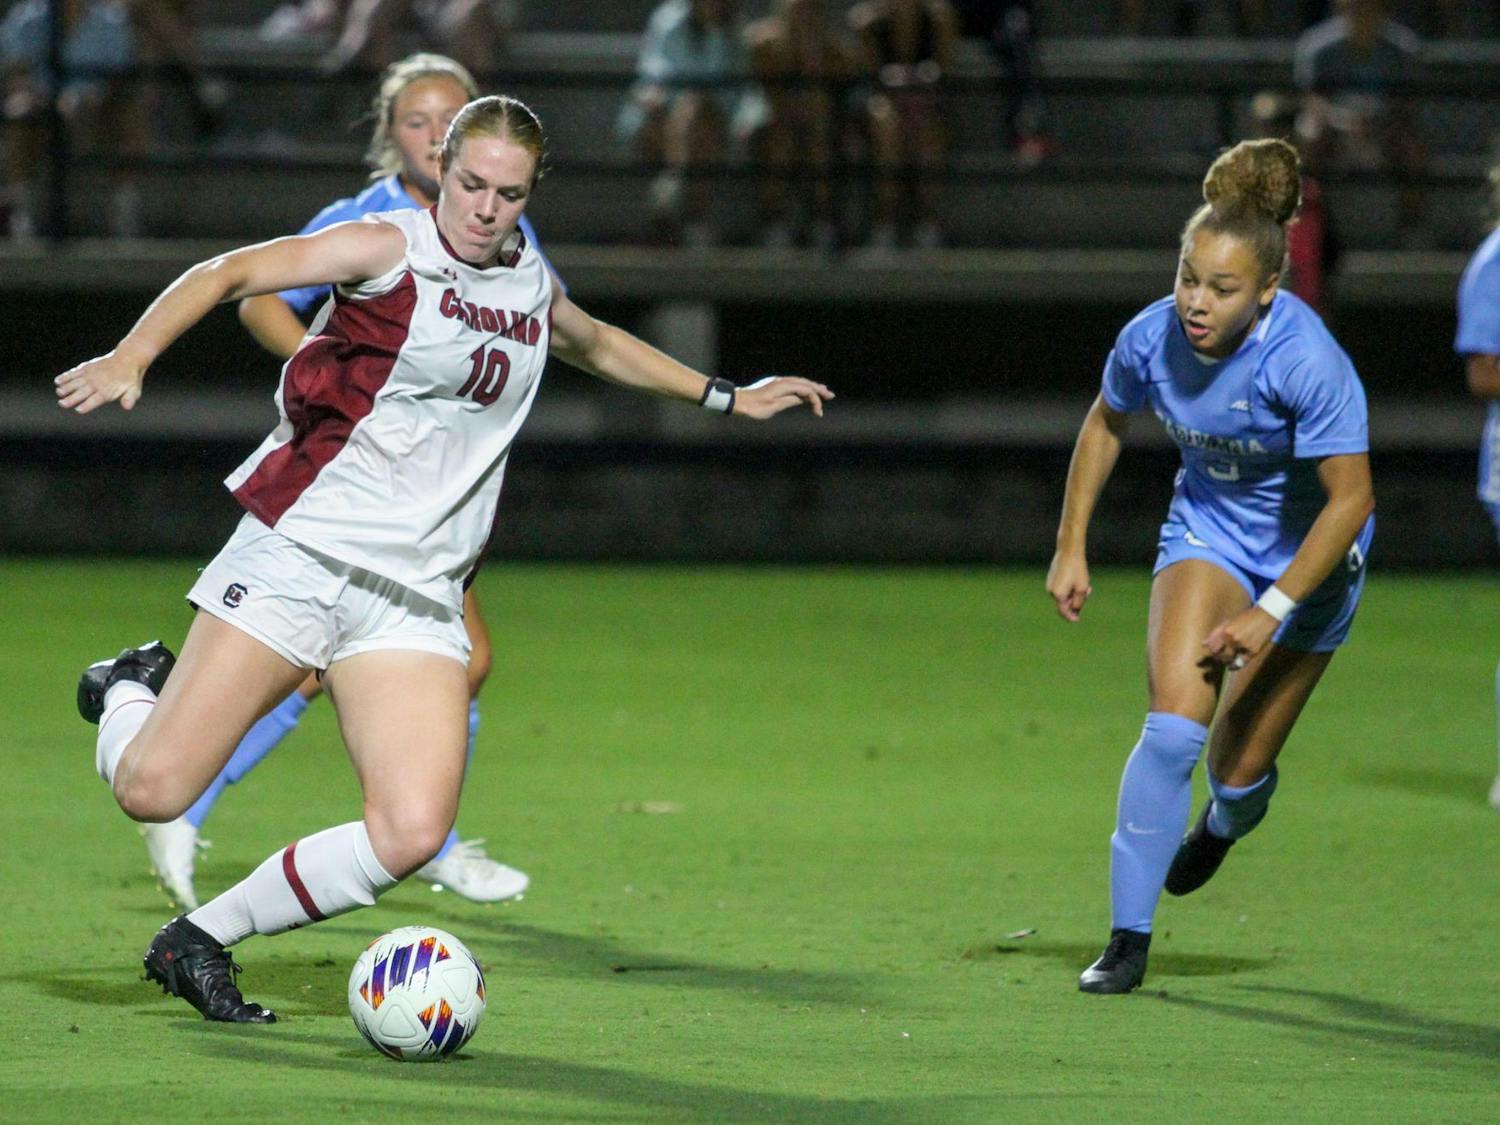 Senior forward Catherine Barry sends the ball of the field during South Carolina’s match against UNC at Stone Stadium on Sept. 7, 2023. The Gamecocks lost to the Tar Heels 2-1.